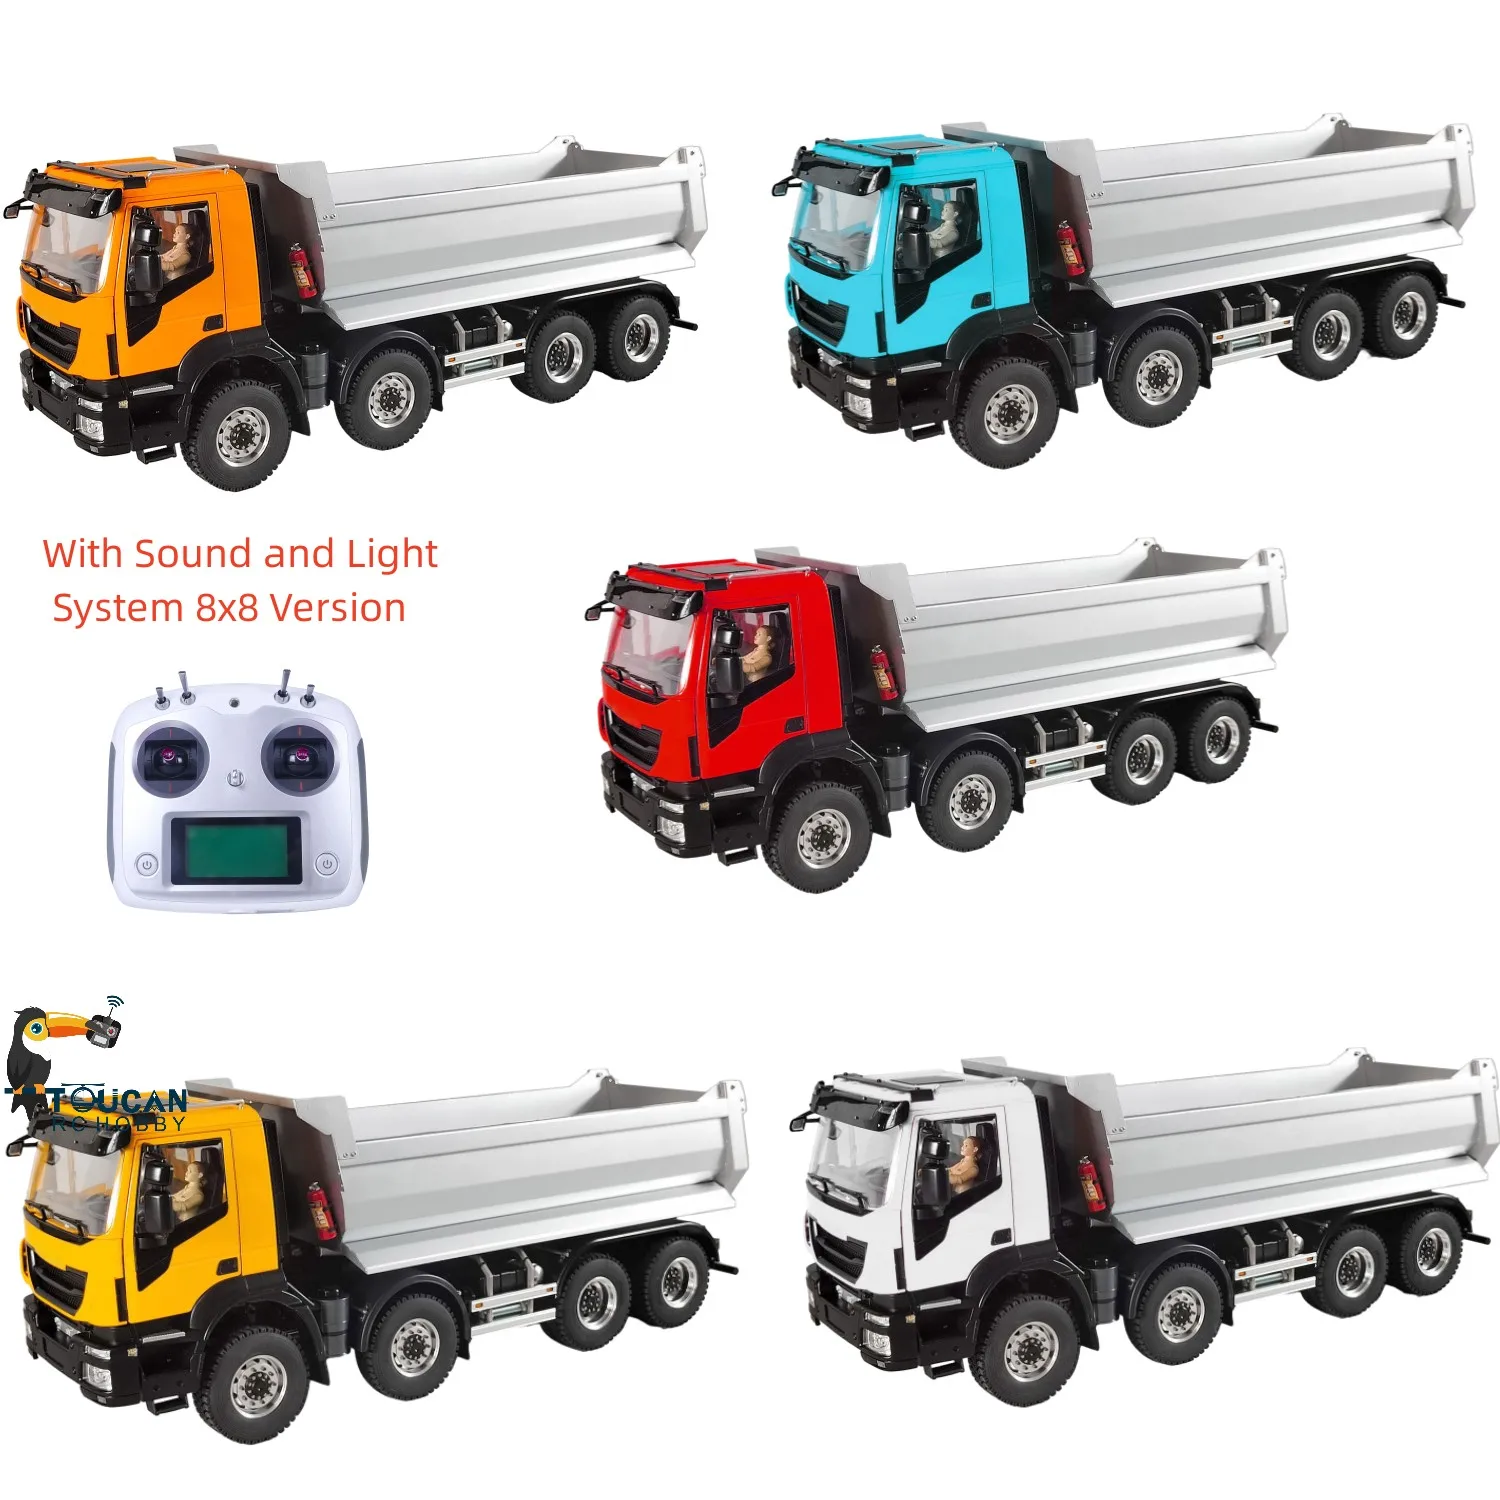 

Toys 1/14 8x8 RC Hydraulic Dump Truck Metal Radio Control Tipper Car Sound Light Finished Painted Vehicle for Boys Gift TH23656